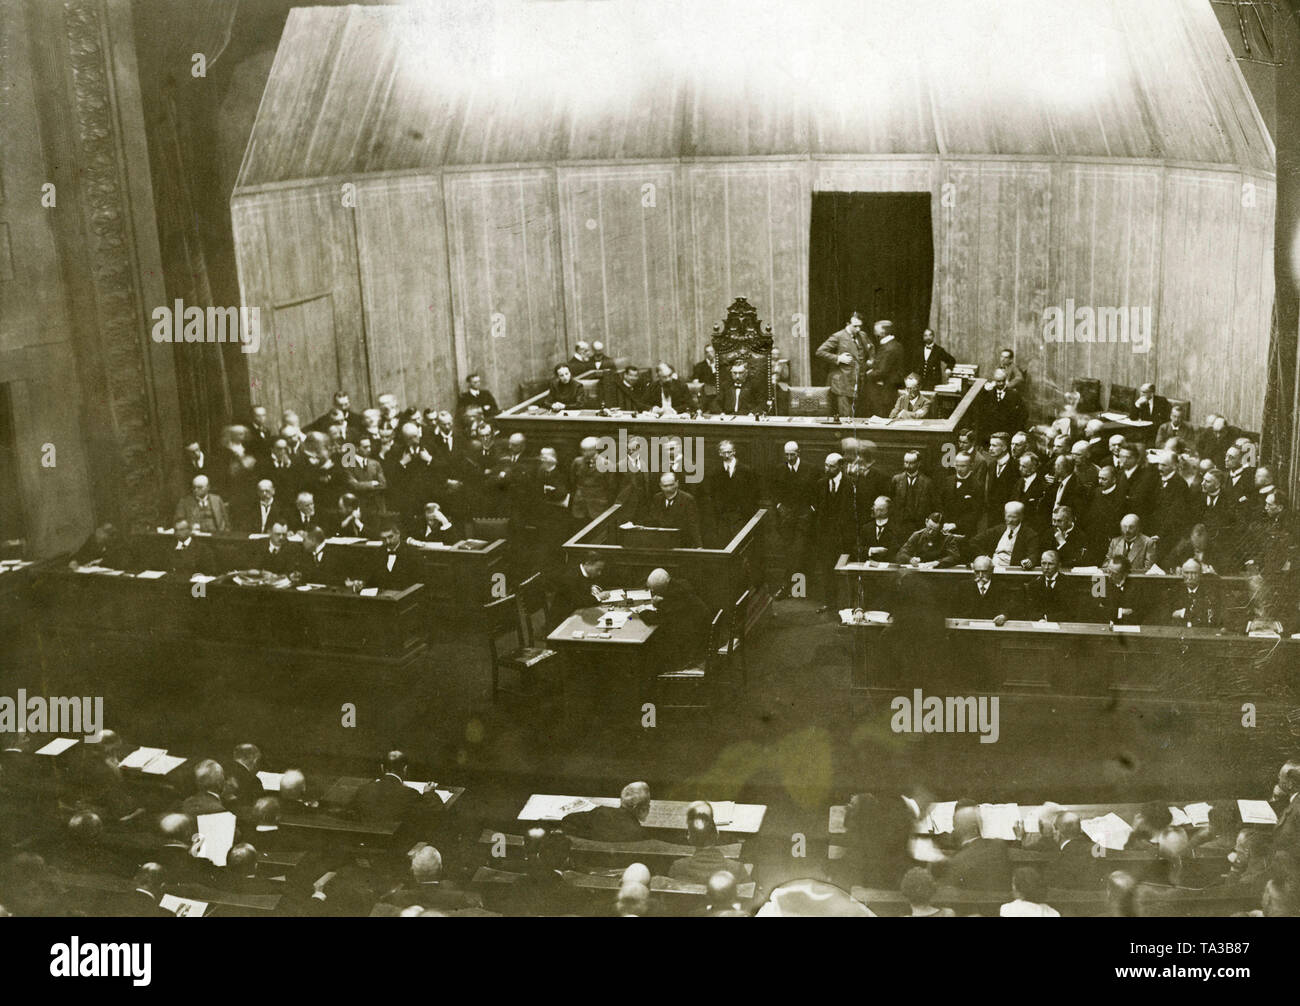 Prime Minister Philipp Heinrich Scheidemann speaks against the adoption of the Treaty of Versailles in a protest meeting. This dispute breaks up the first government of the new republic. Up until 1933 this repeatedly led to internal political tensions. Stock Photo